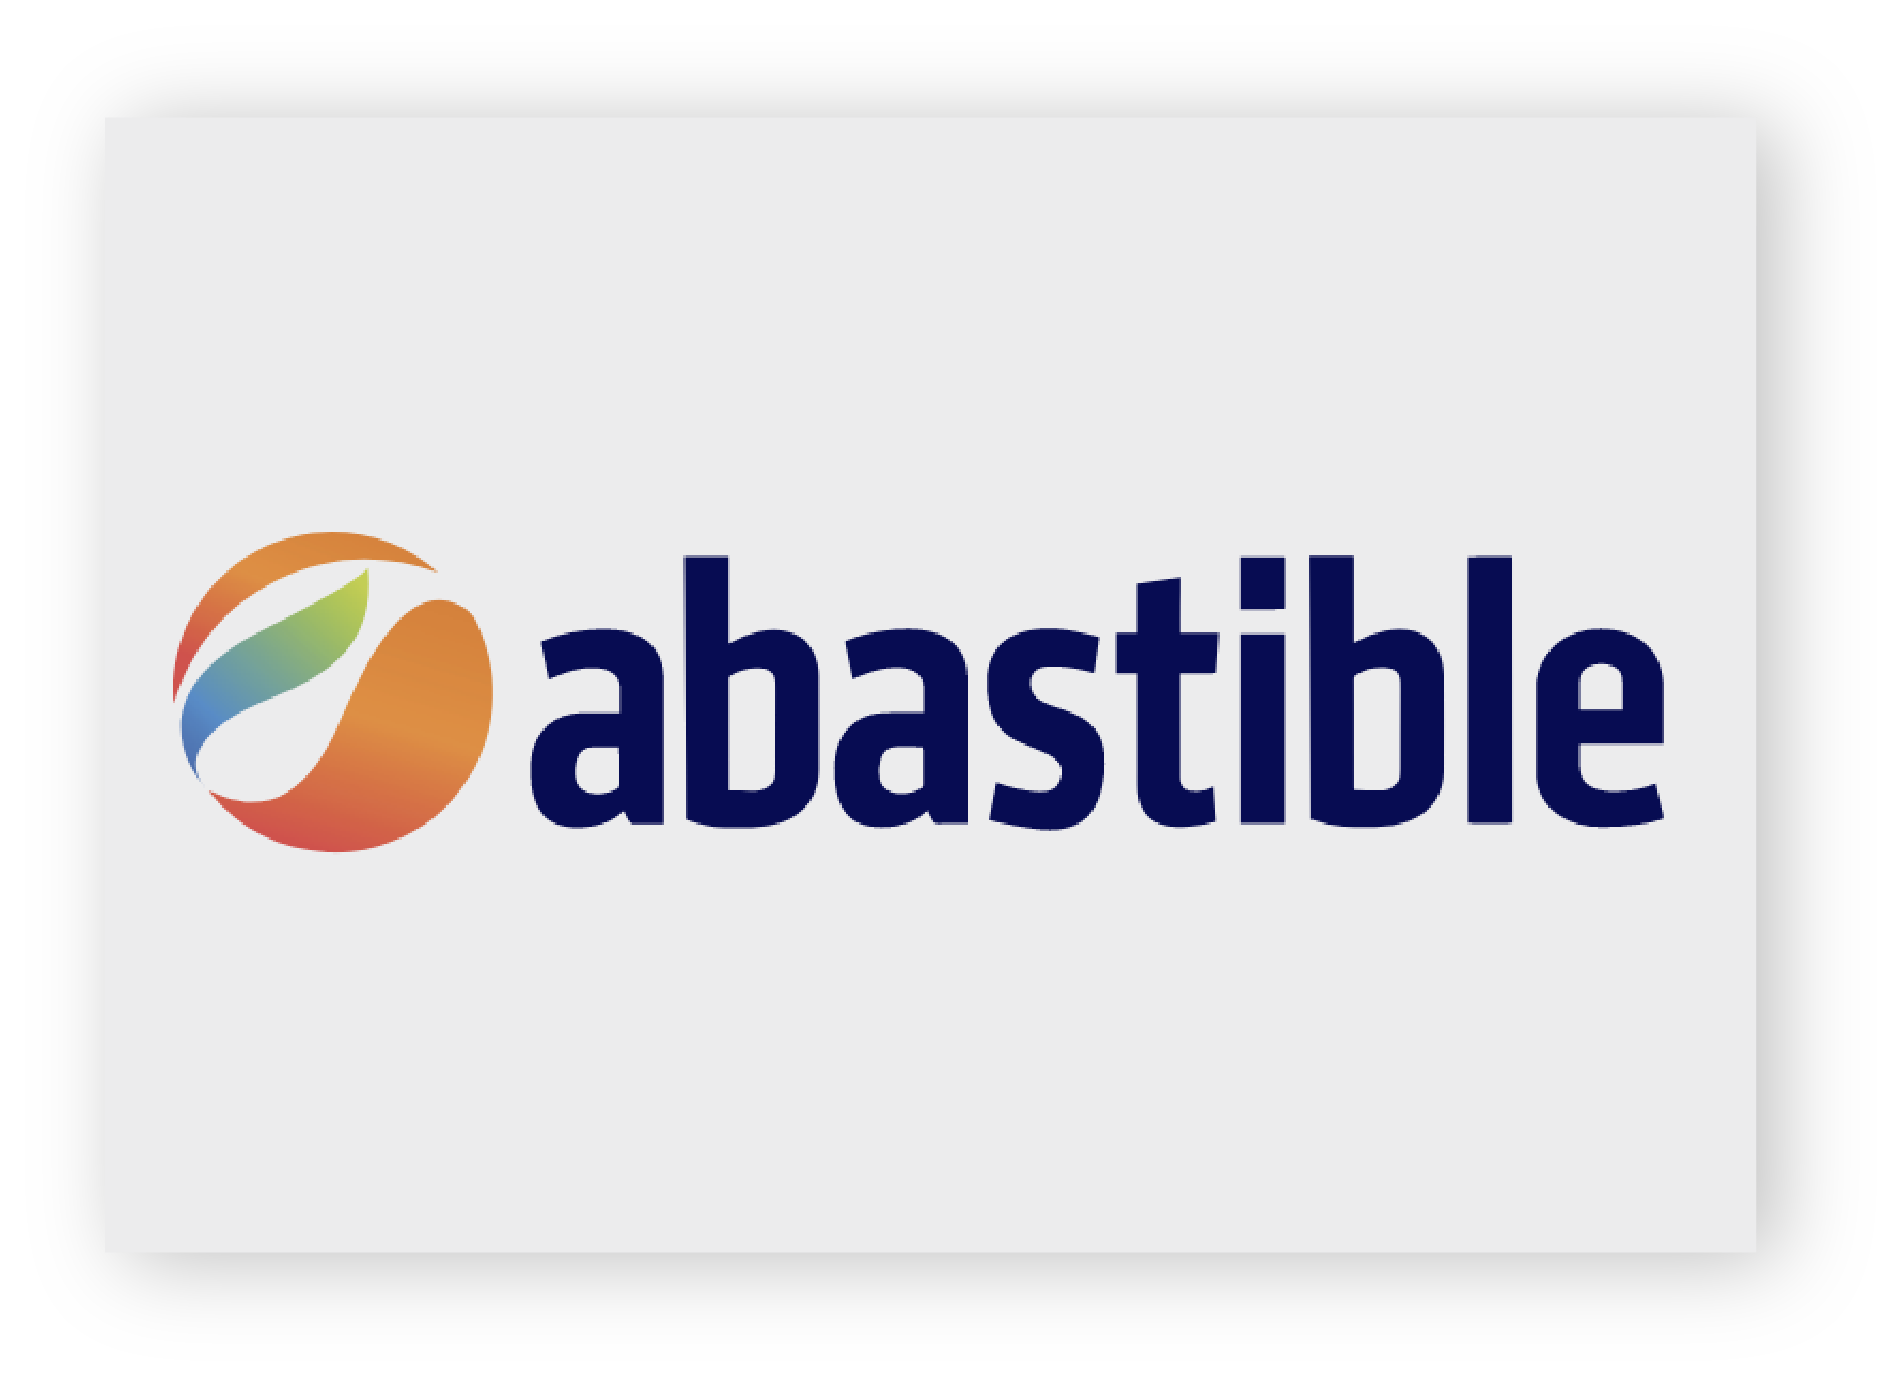 ABASTIBLE